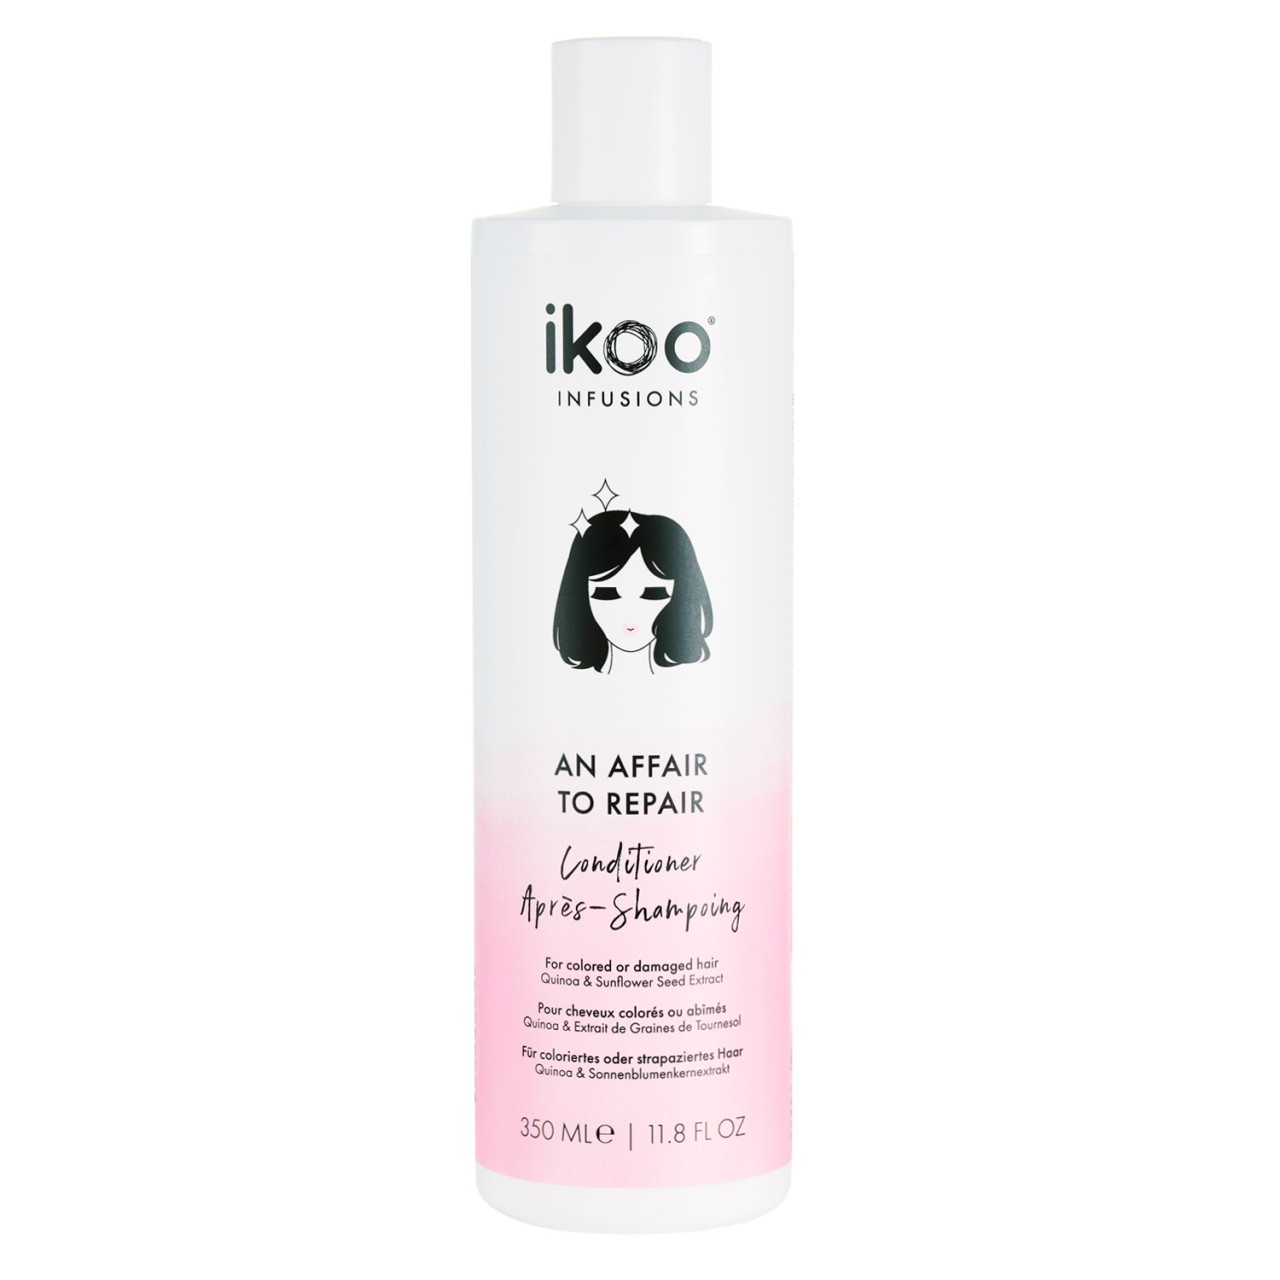 ikoo An Affair to Repair Conditioner